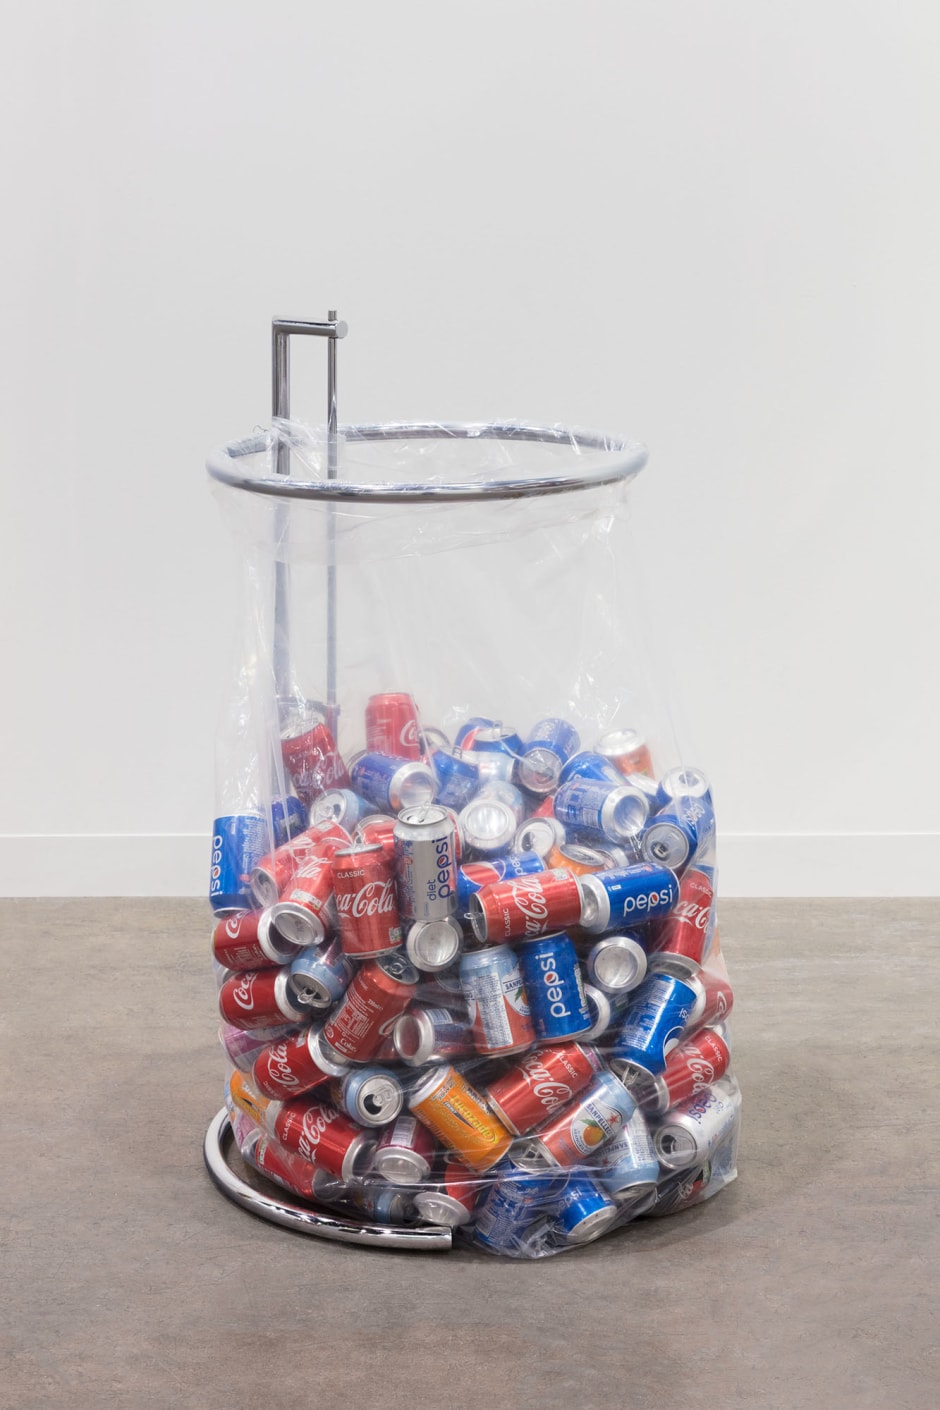 Recycling Sculpture (Eileen Gray Table), 2018  reproduction Eileen Gray E-1027 Table, plastic recycling bag, replenished recyclables  dimensions variable